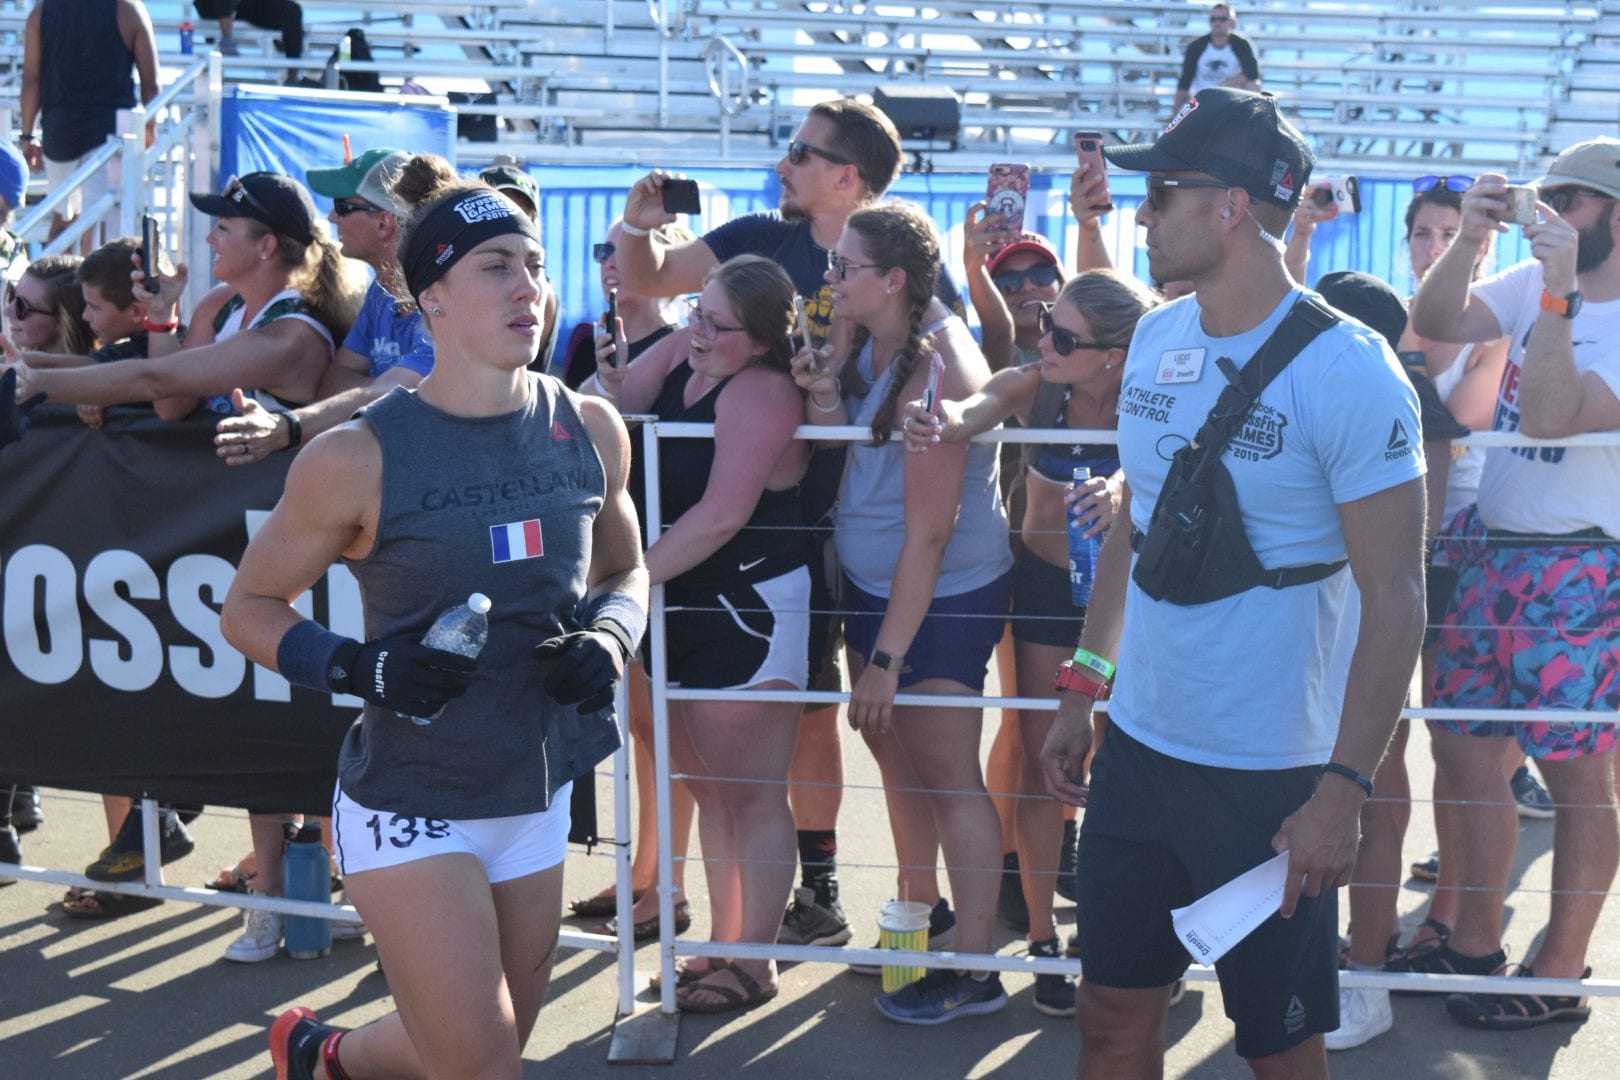 Carole Castellani takes the field for the first event of the 2019 CrossFit Games